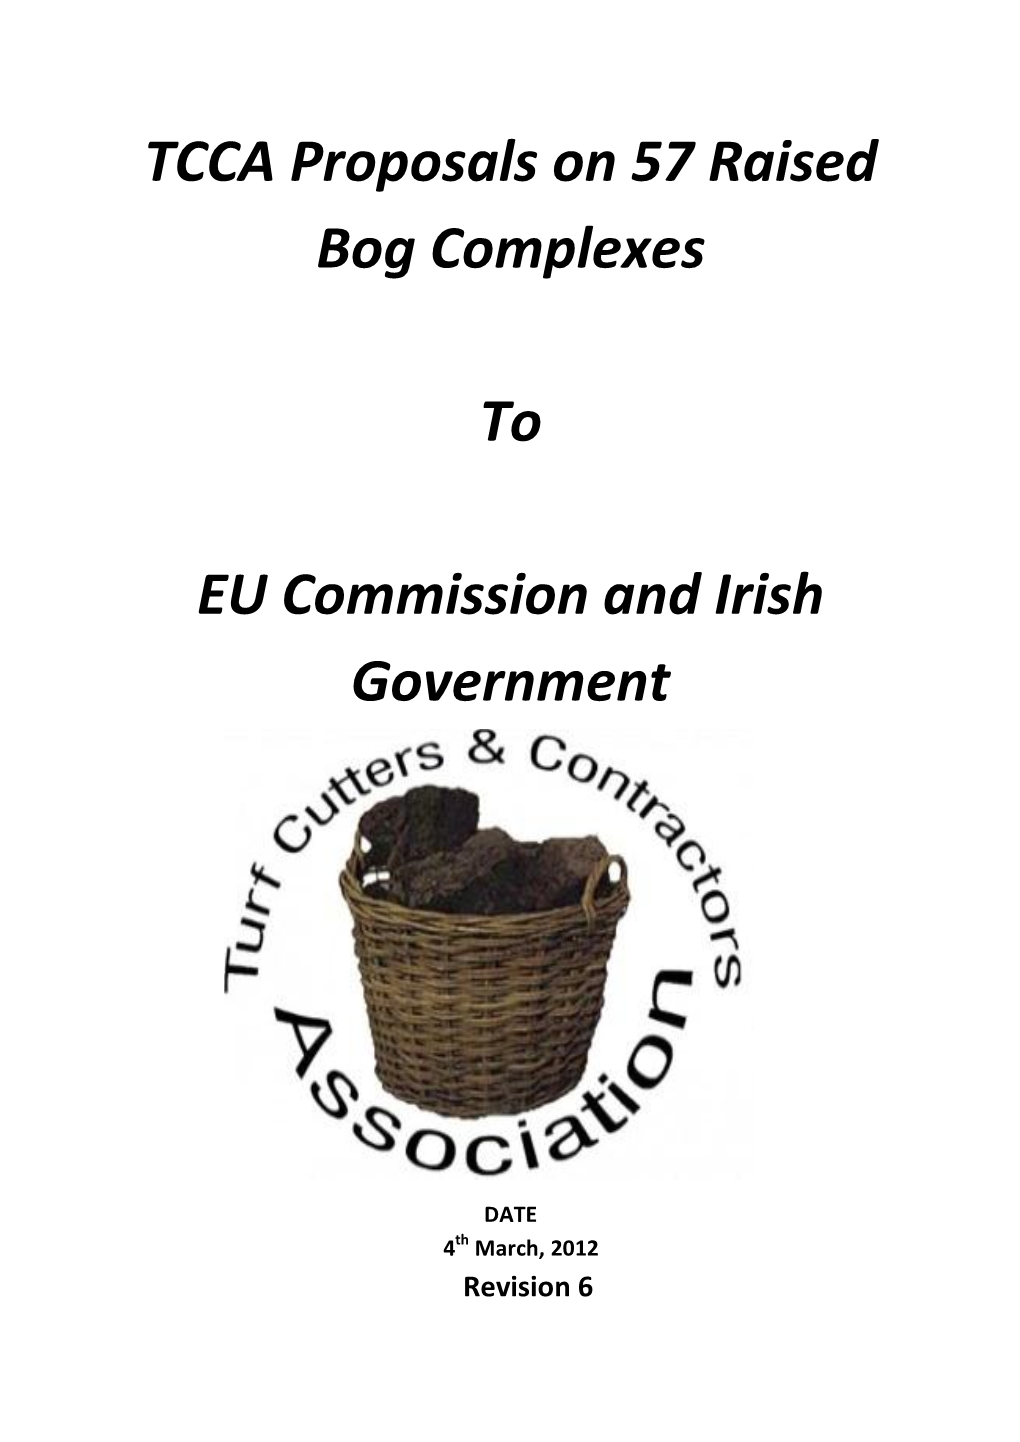 TCCA Proposals on 57 Raised Bog Complexes to EU Commission and Irish Government